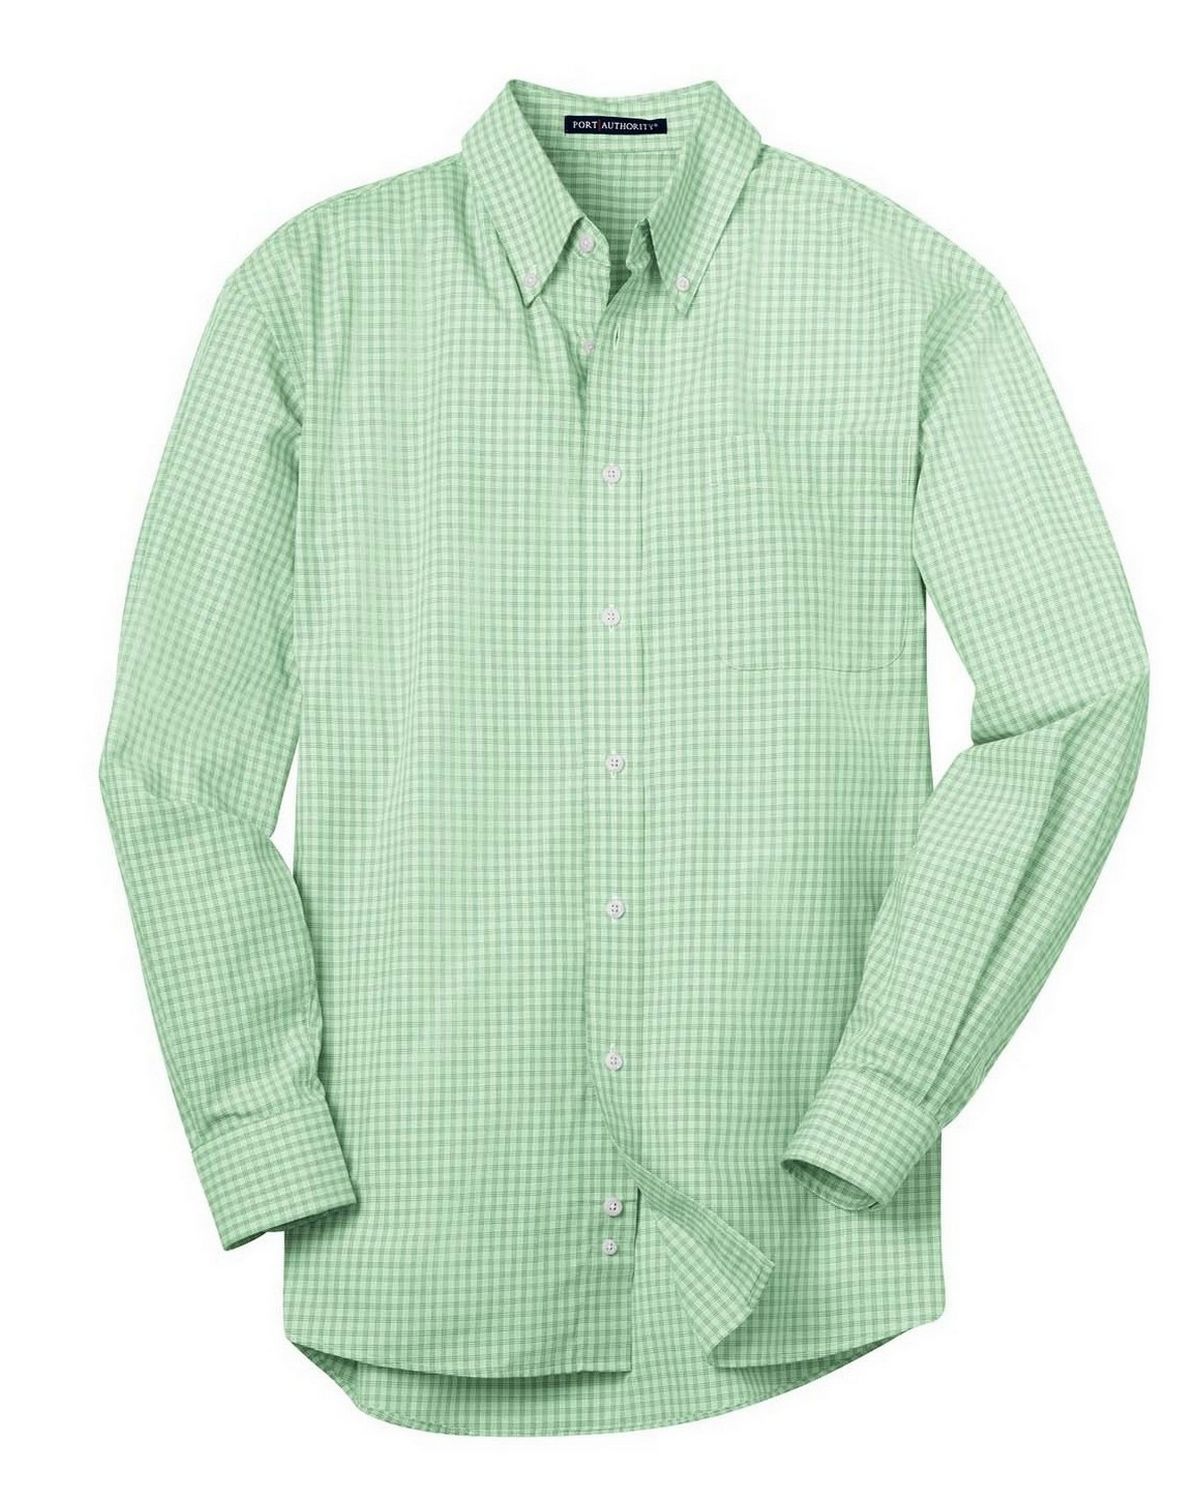 Port Authority S639 Plaid Pattern Easy Care Shirt